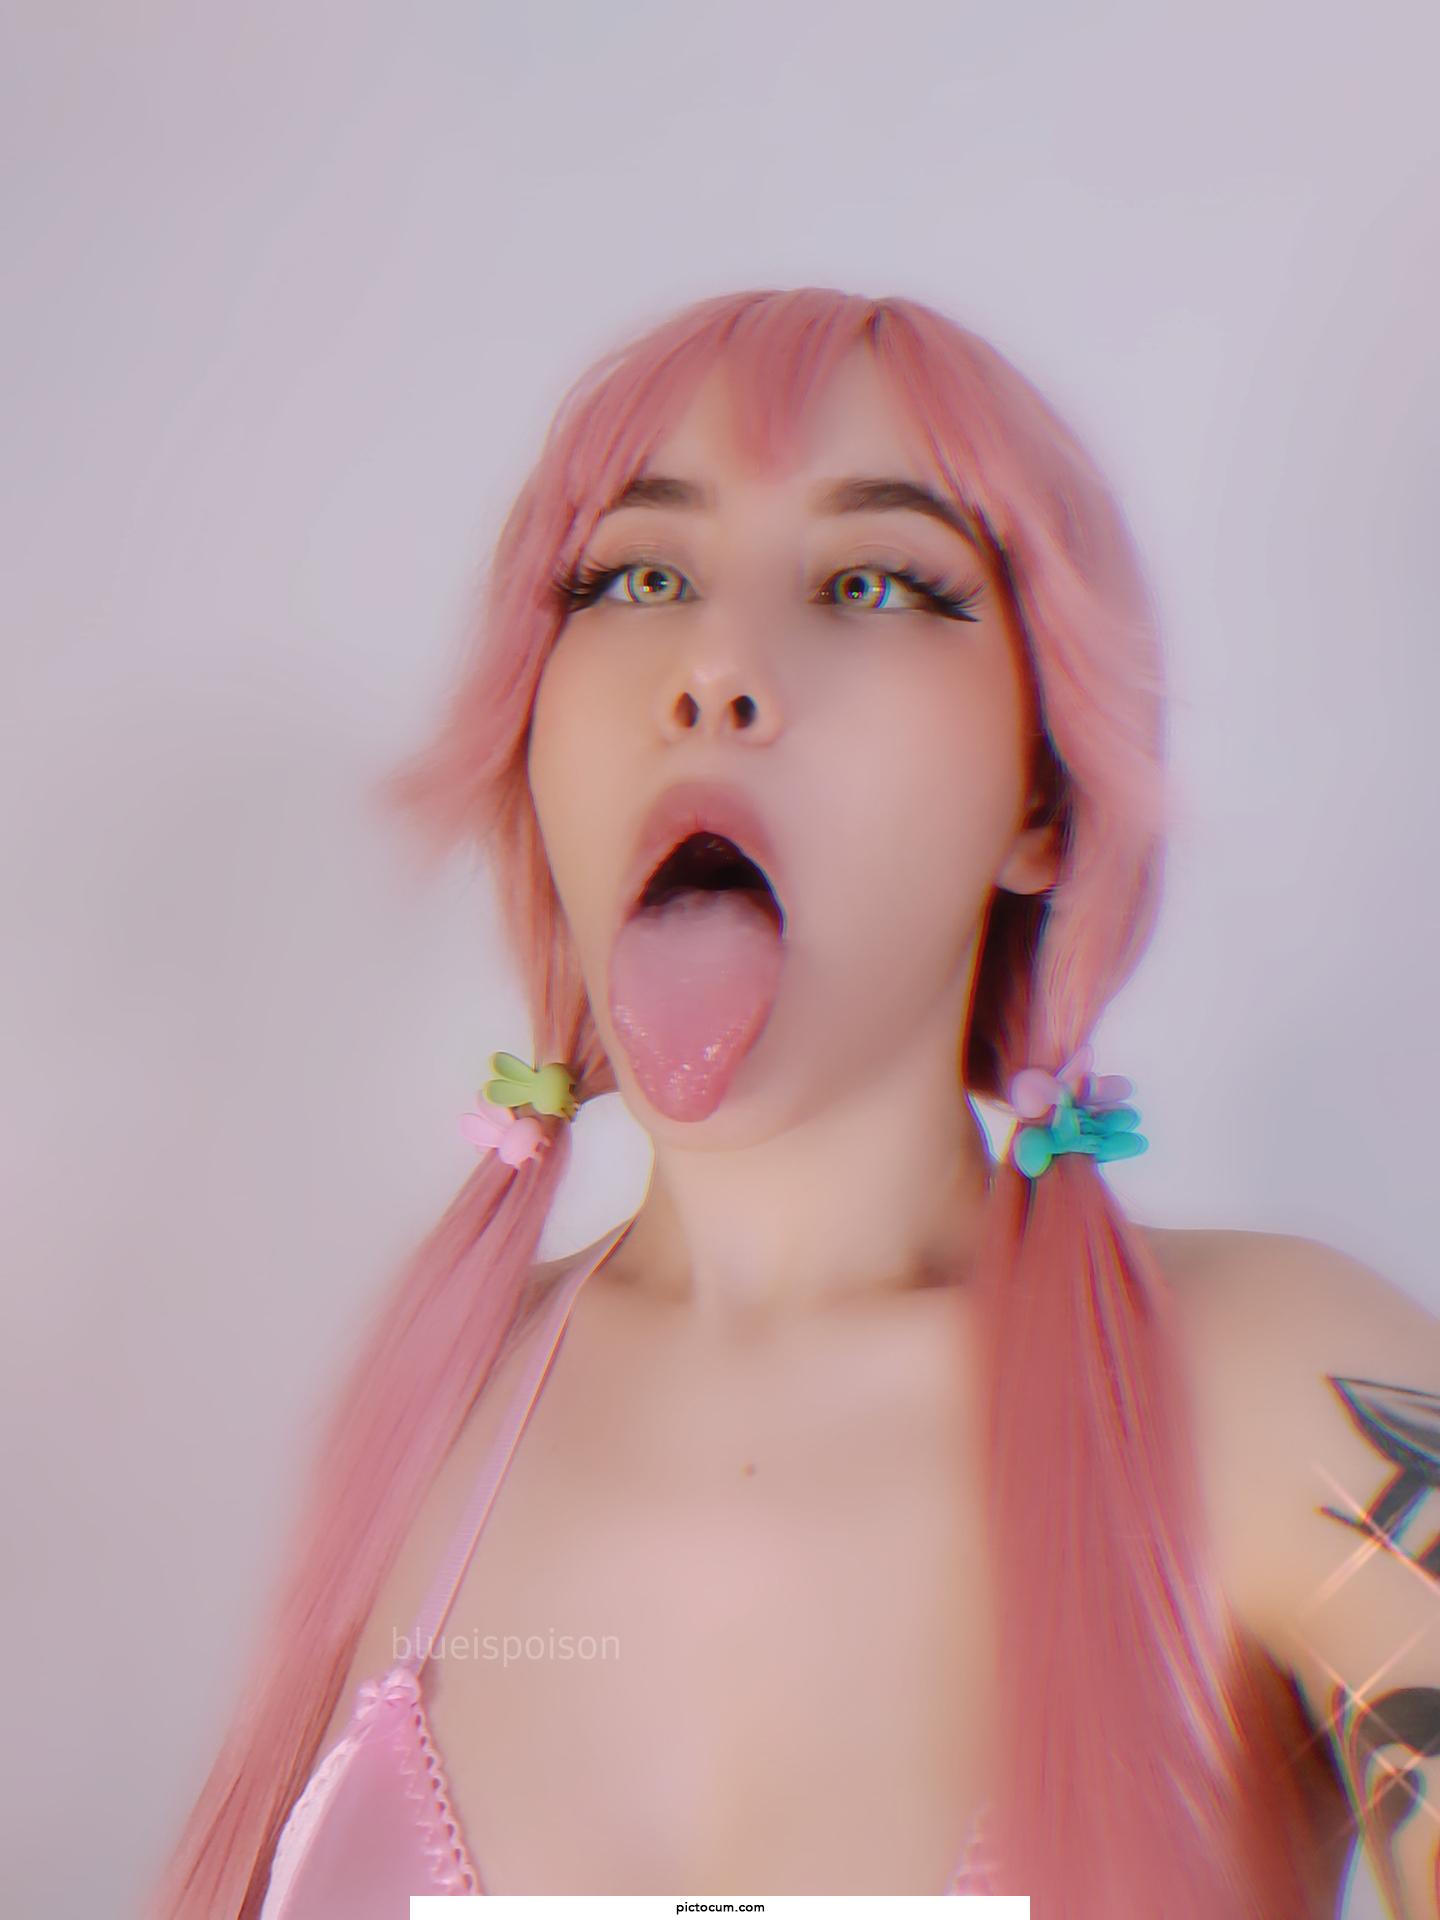 show me ur love in my tongue